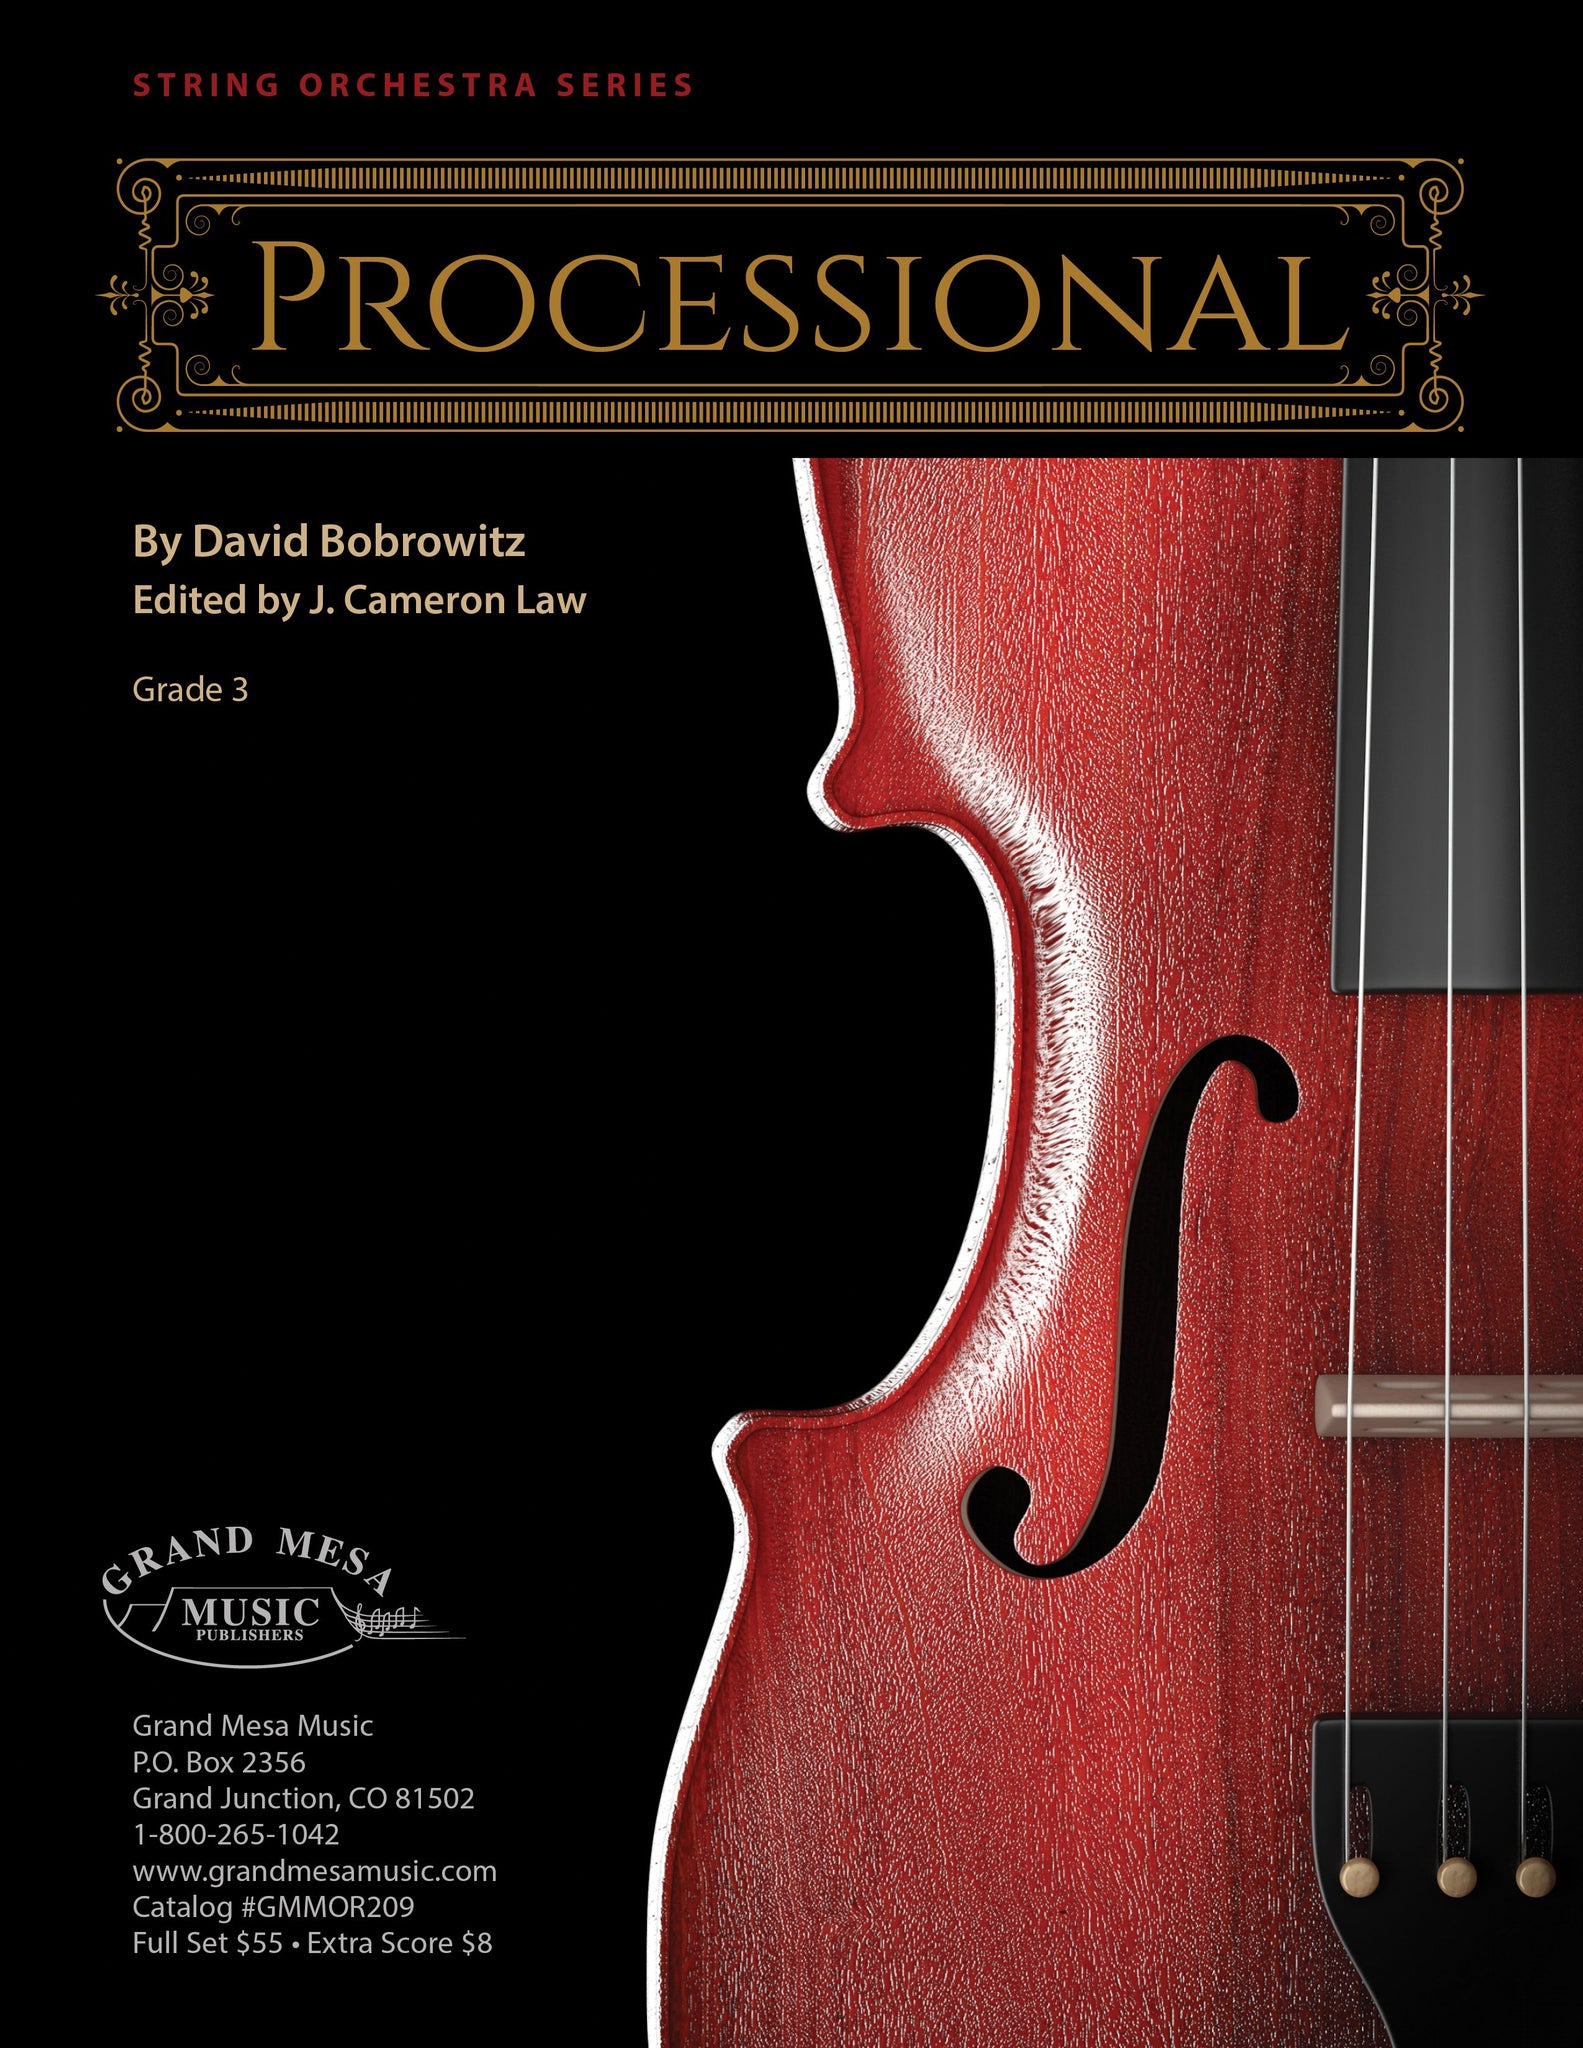 Strings sheet music cover of Processional, composed by David Bobrowitz.